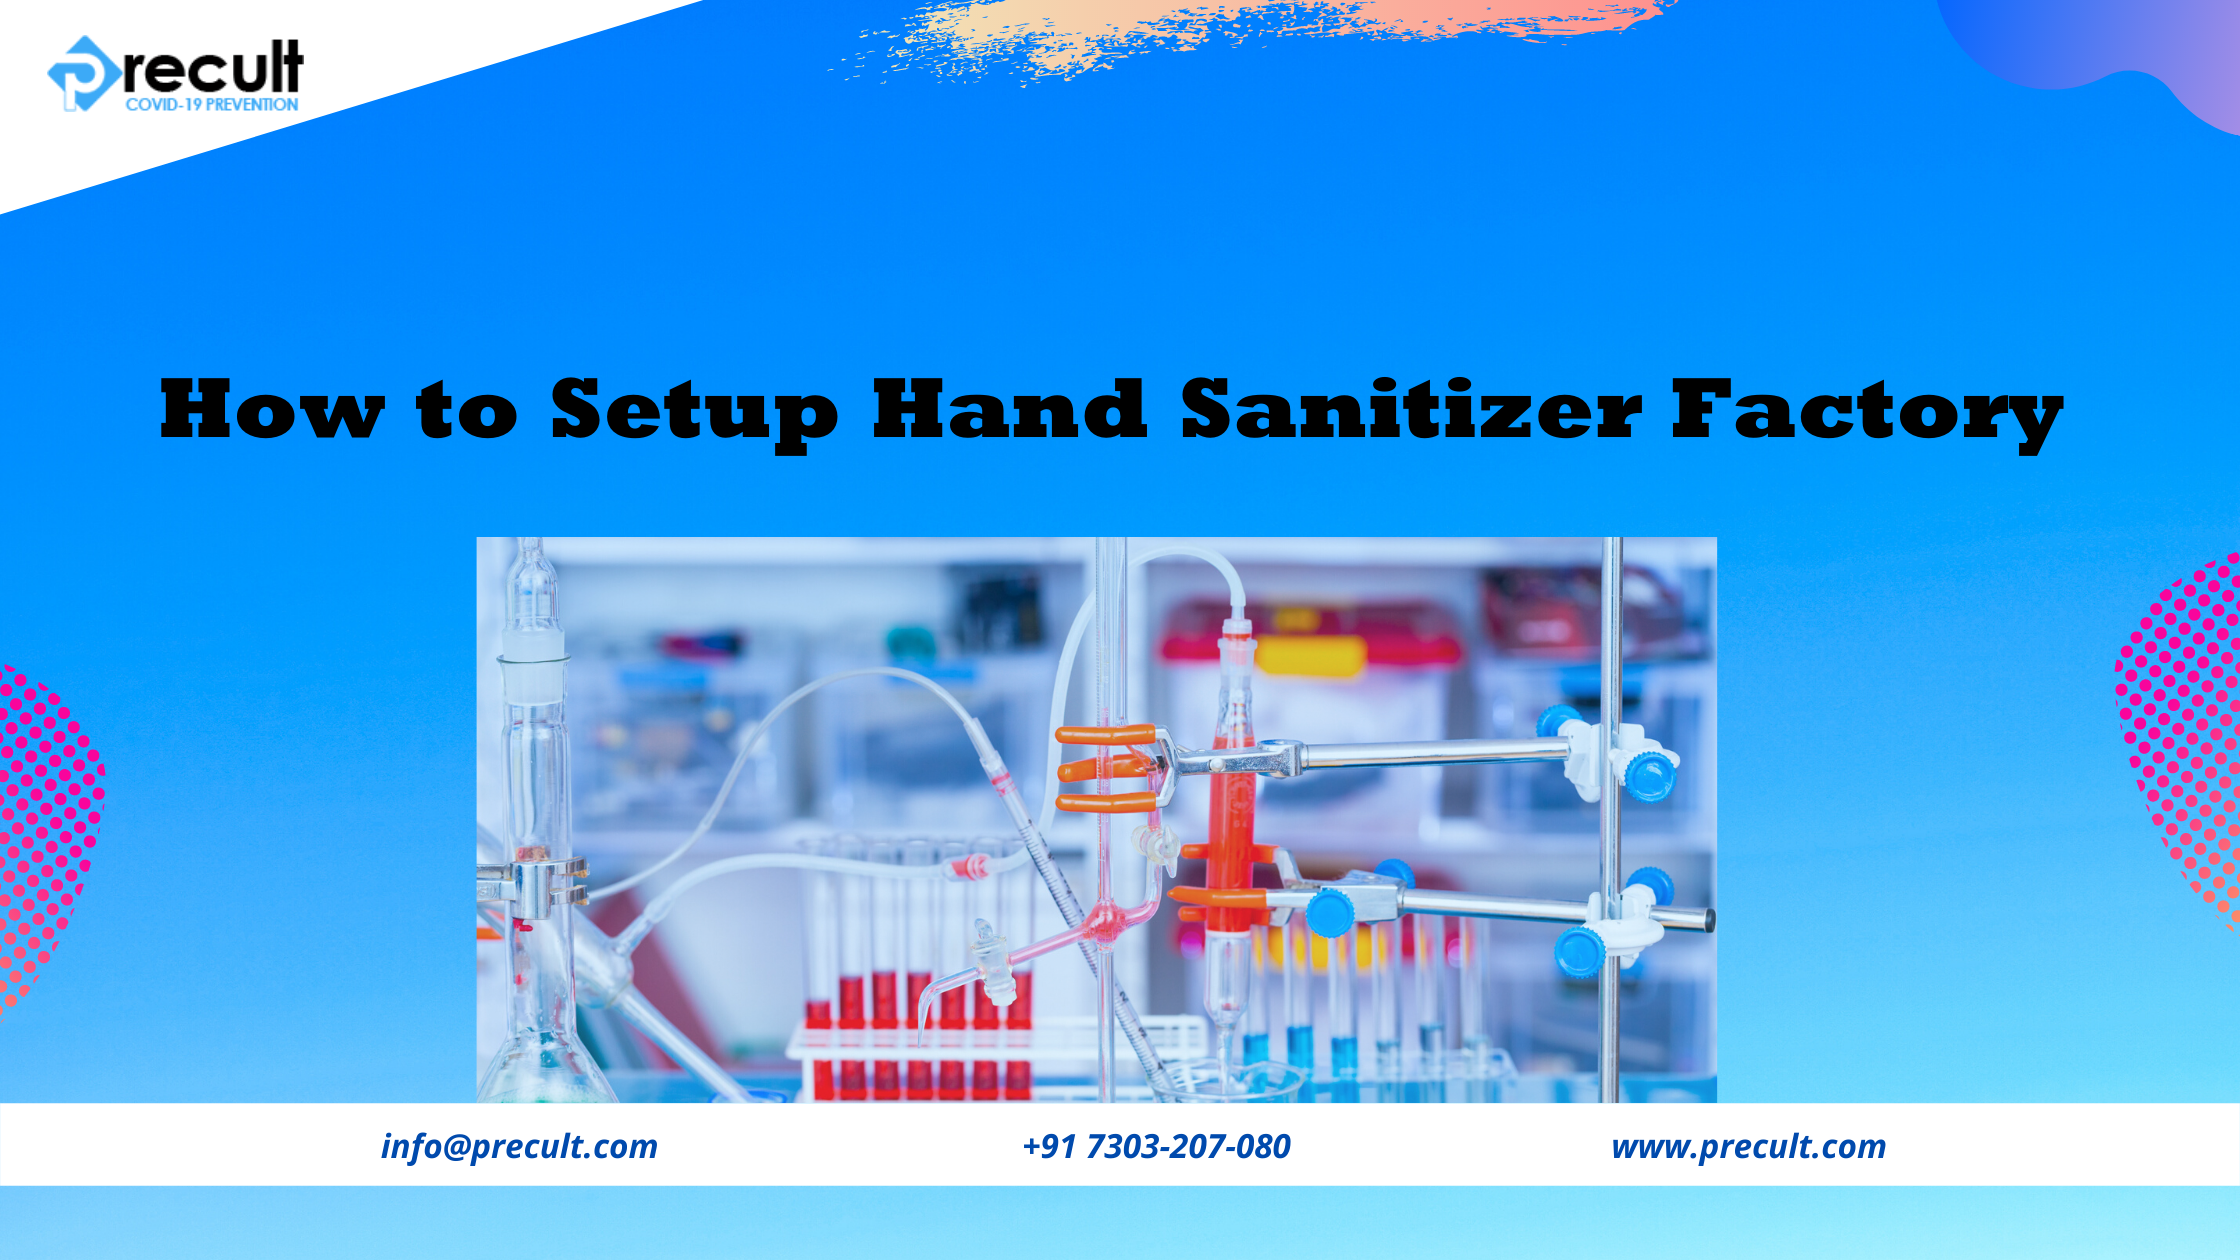 How to Setup Hand Sanitizer Factory